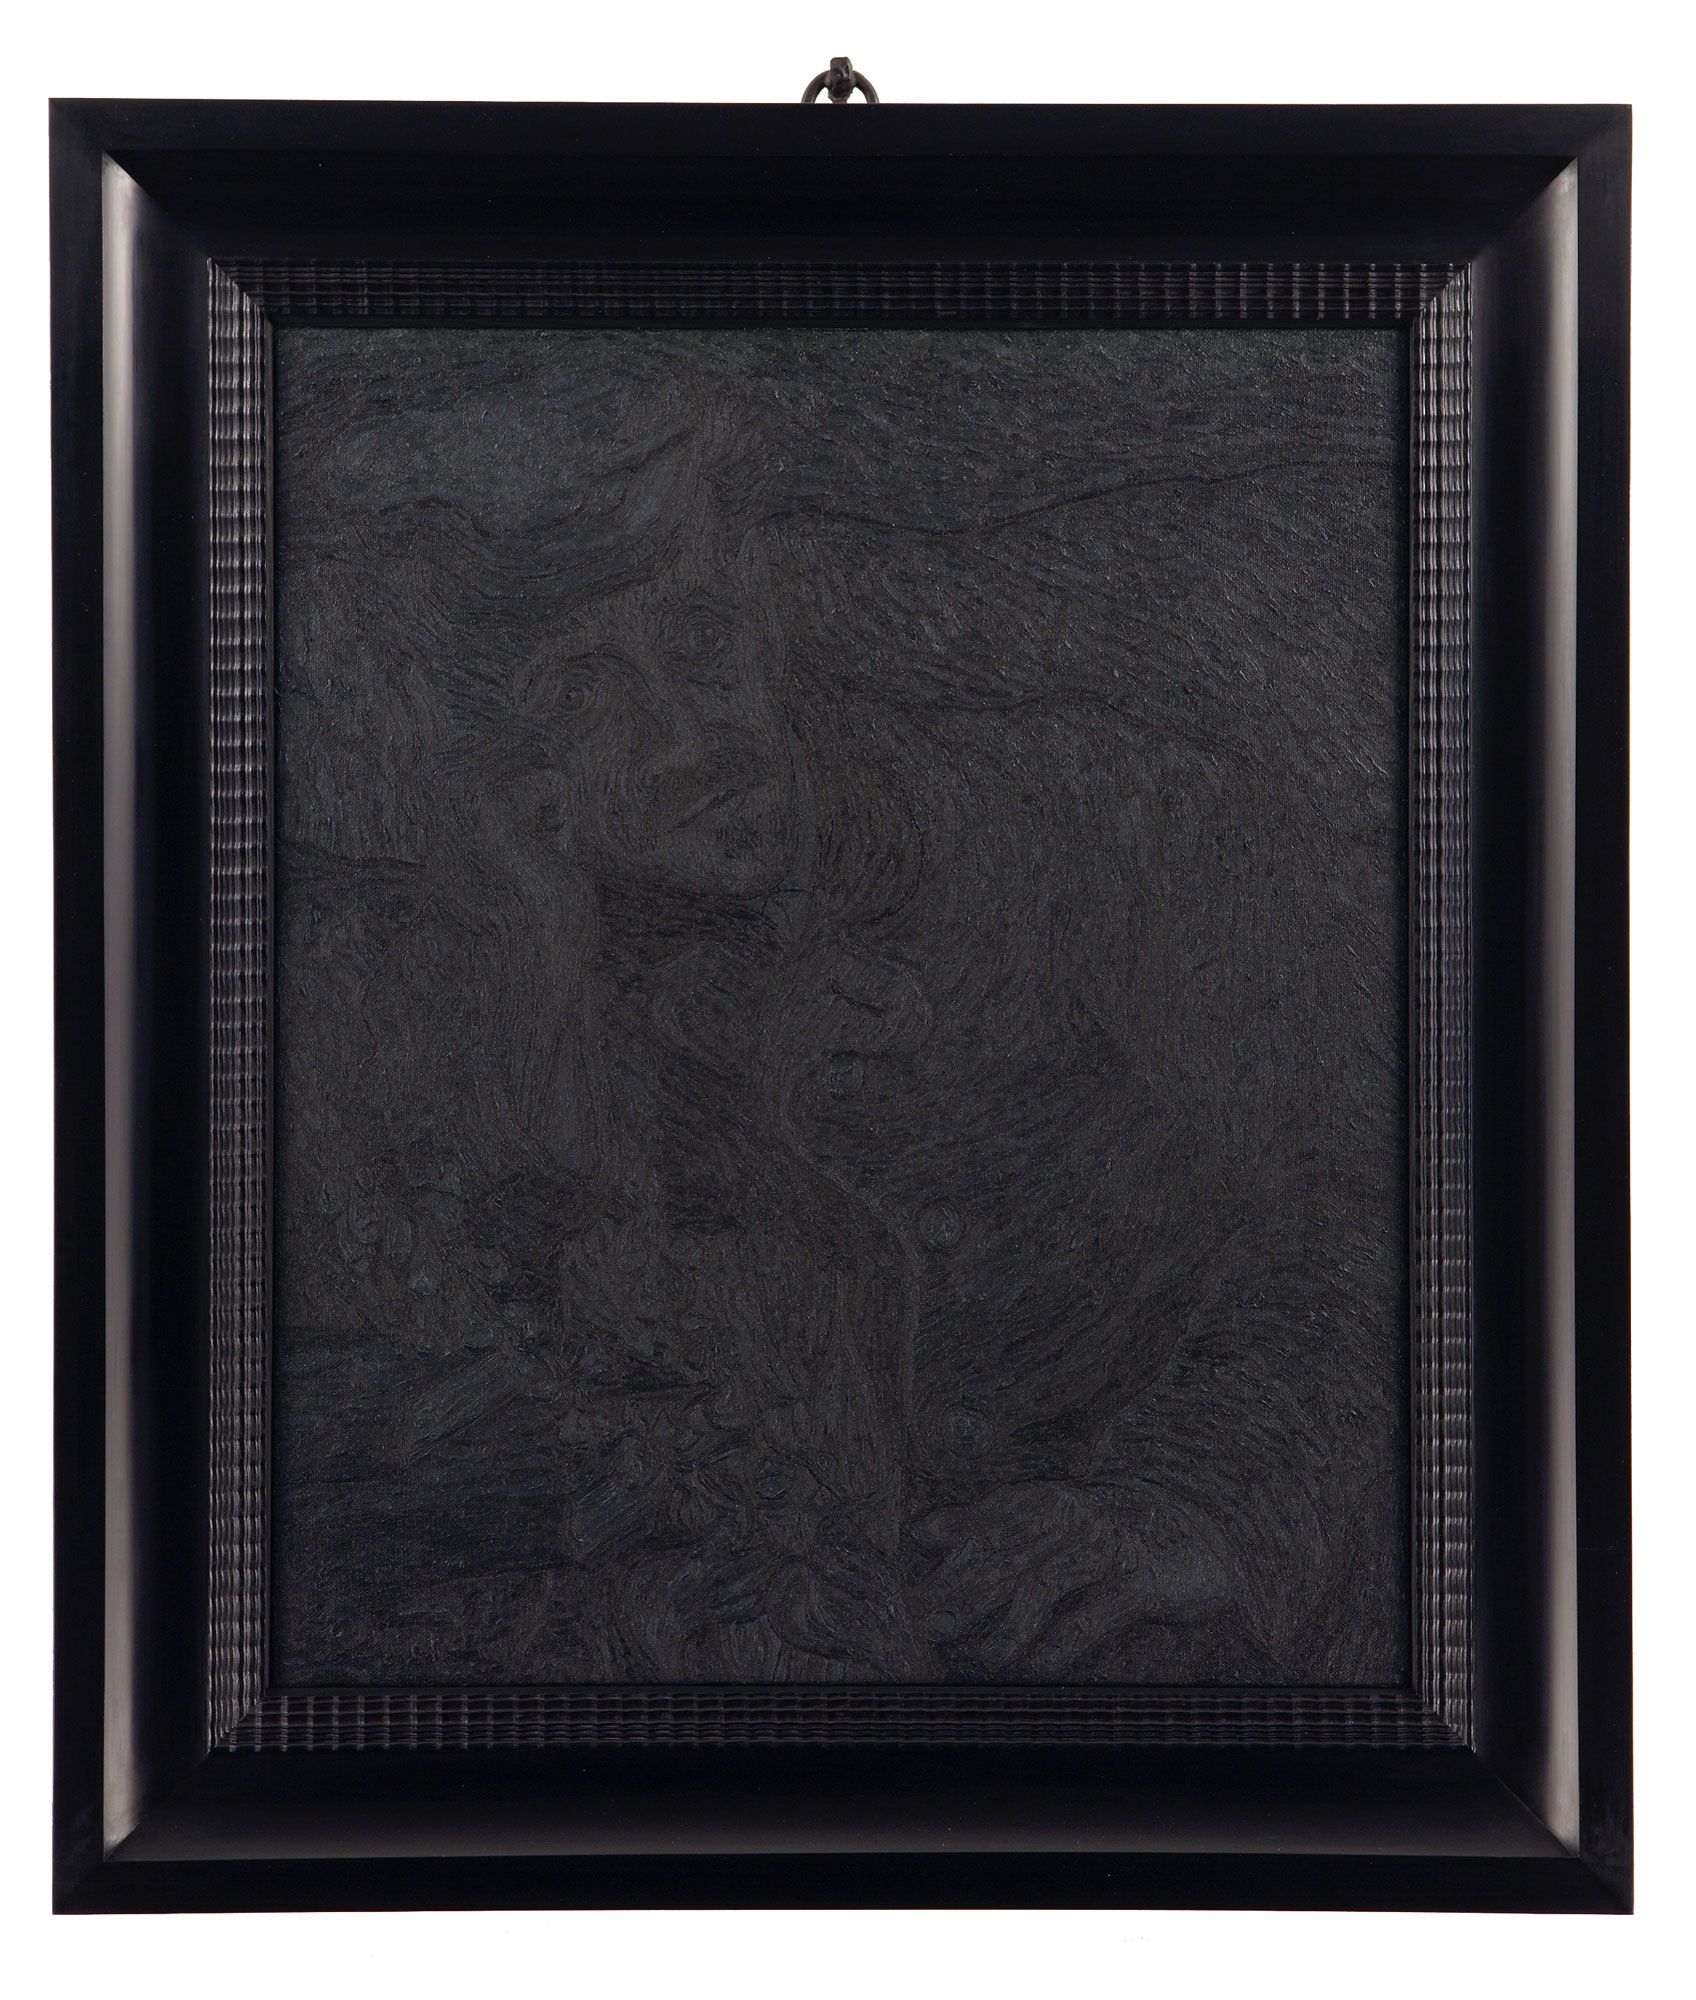 A soulful reinvention of Van Gogh's Dr Gachet painting in black oil paint by Mark Alexander - Version XIII.